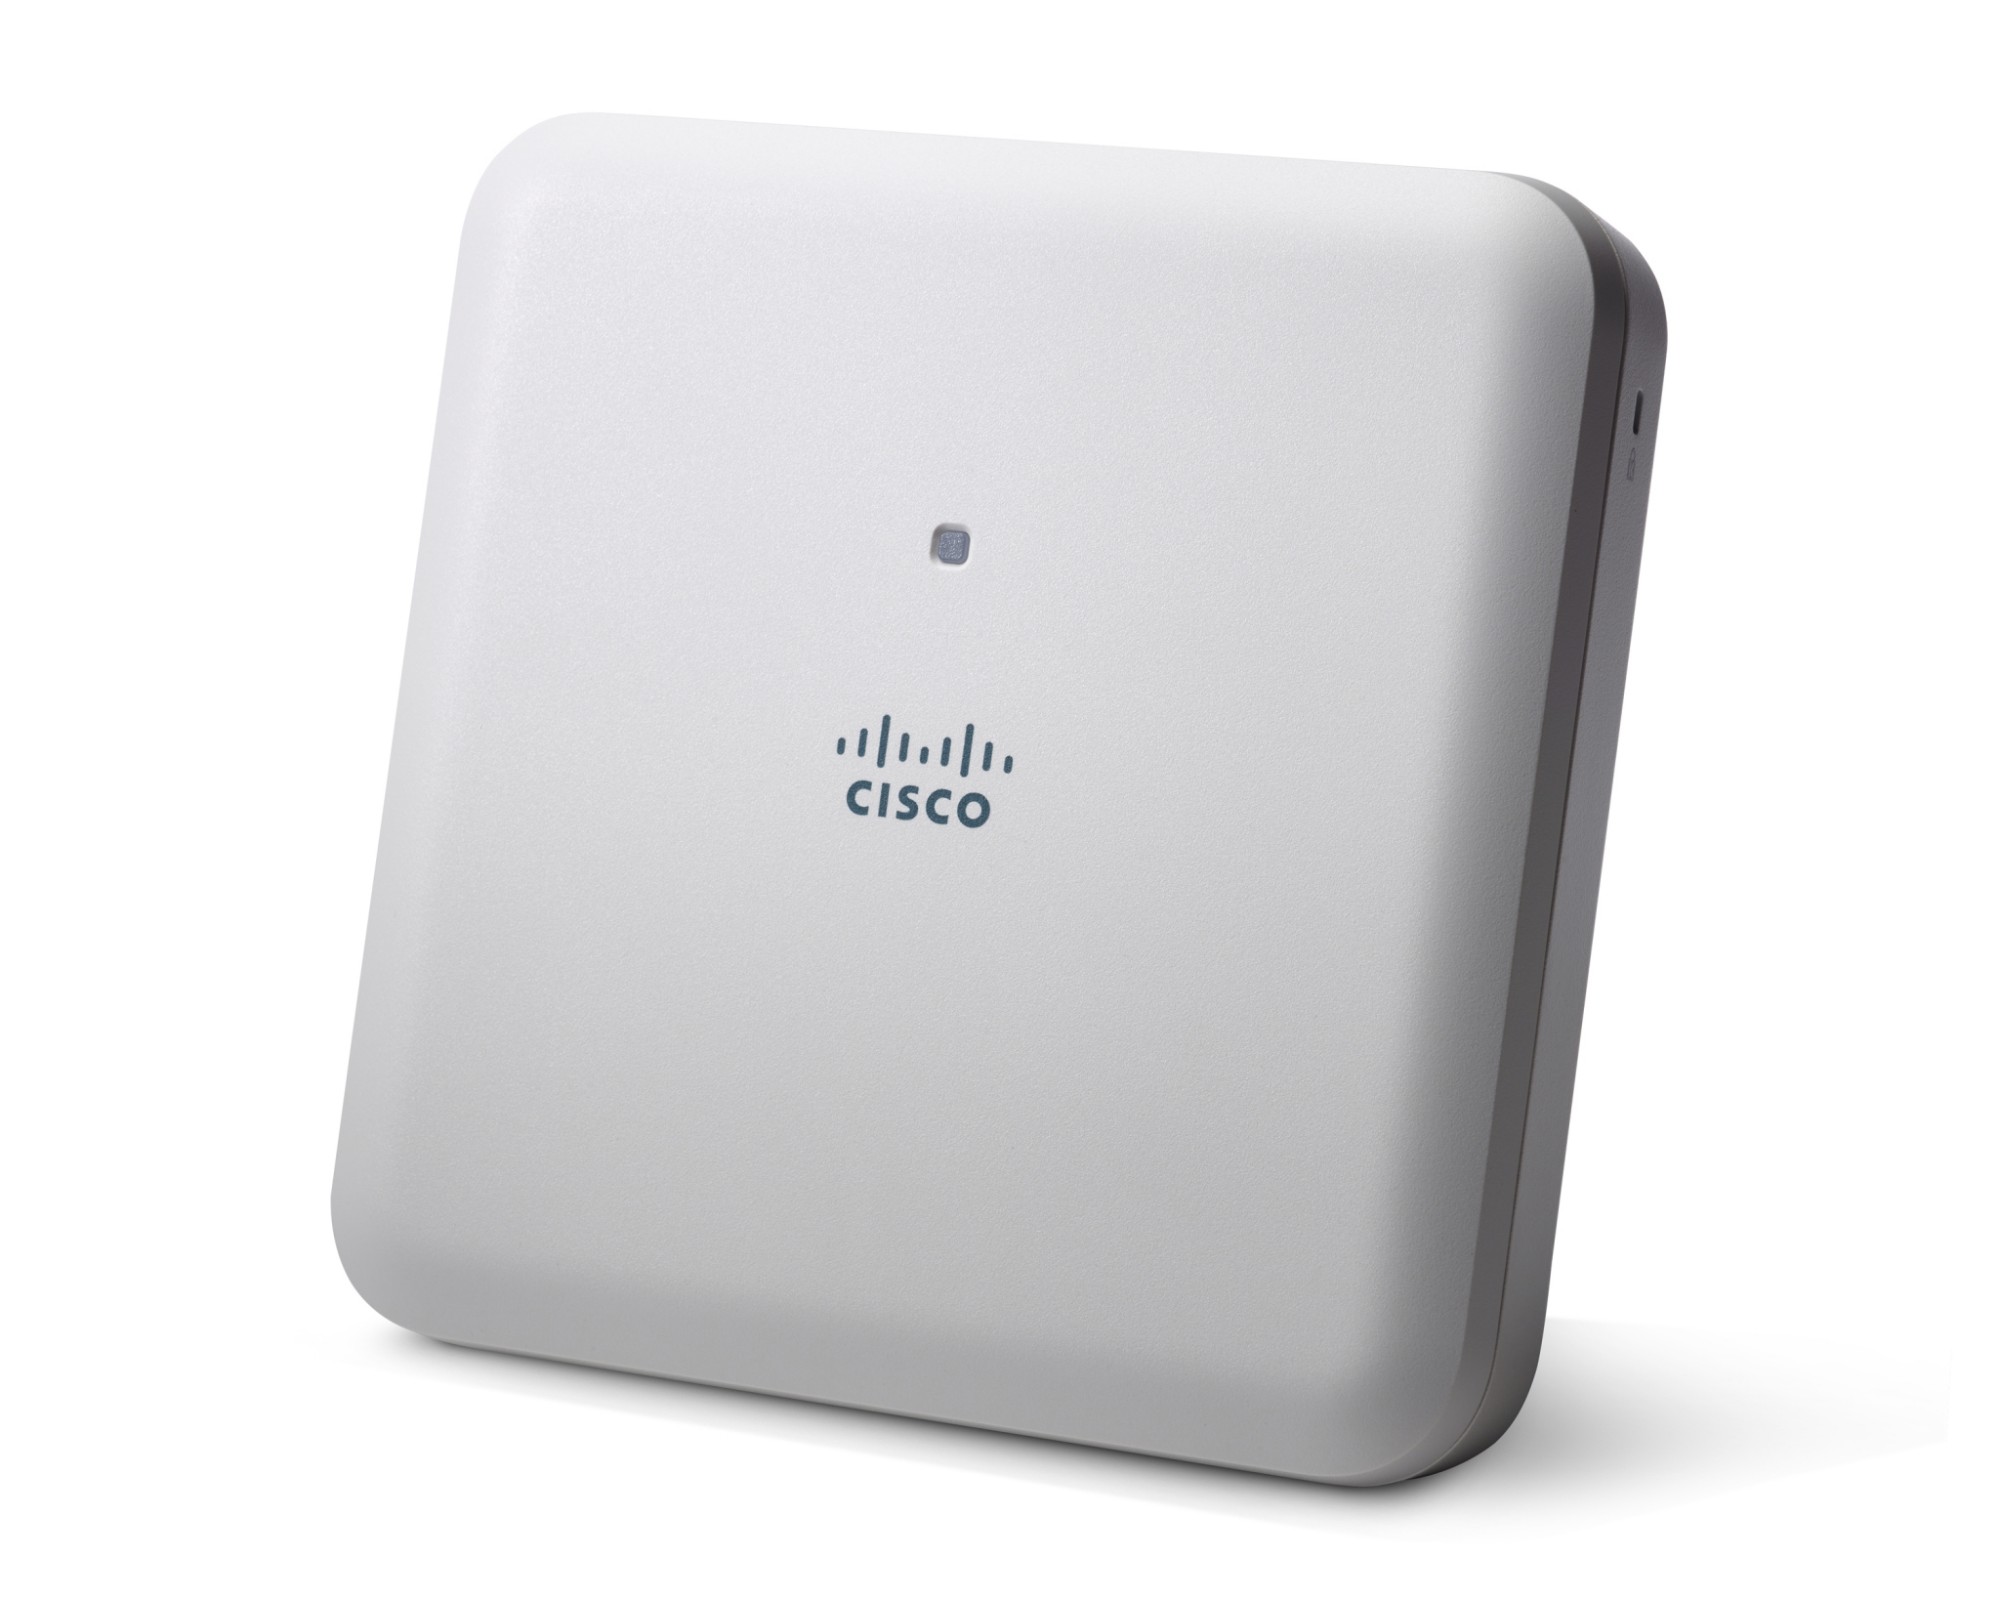 Cisco 1832I Wireless Dual Band 802.11AC Access Point, 478 in